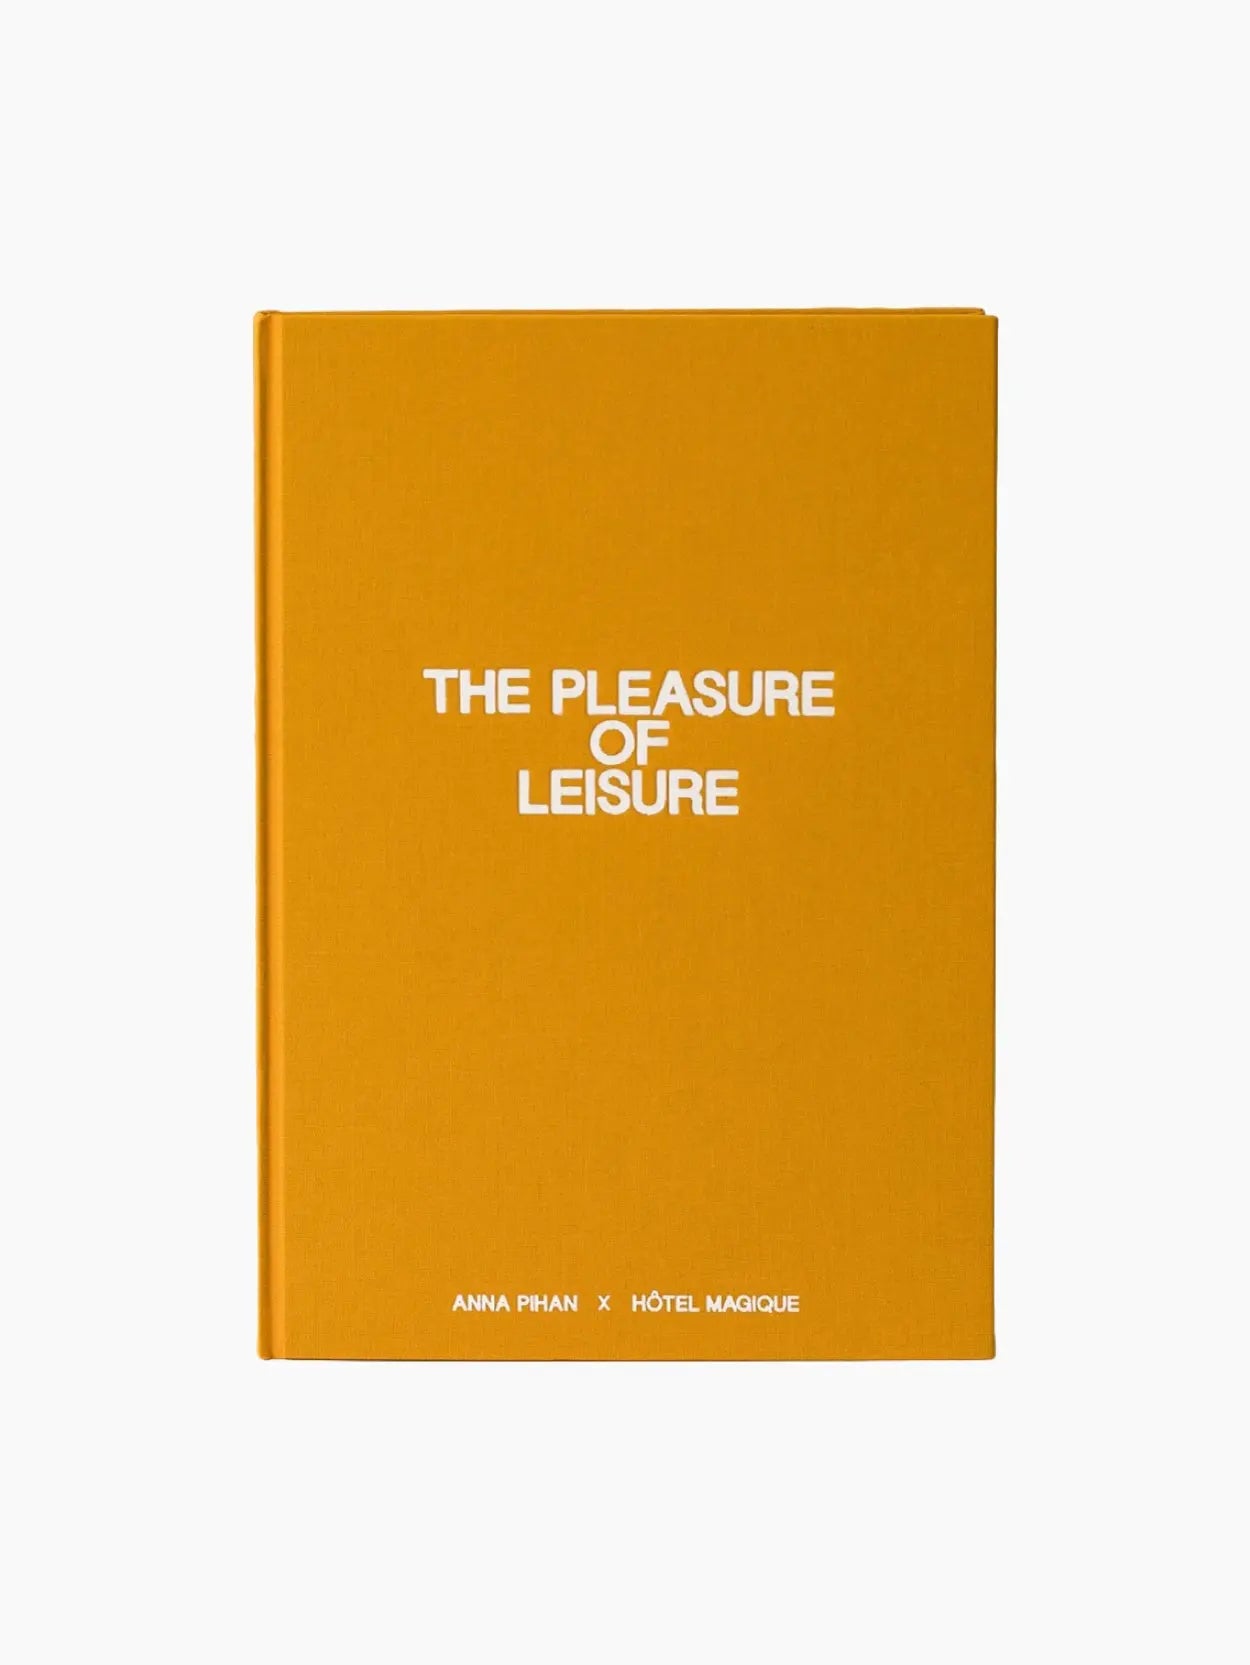 The image shows a book with a solid orange cover. The title "The Pleasure of Leisure" is printed in white text in the center of the cover. Below the title, the names "Anna Phan" and "Hotel Magique" are also printed in white at the bottom, reminiscent of an elegant Barcelona store display.